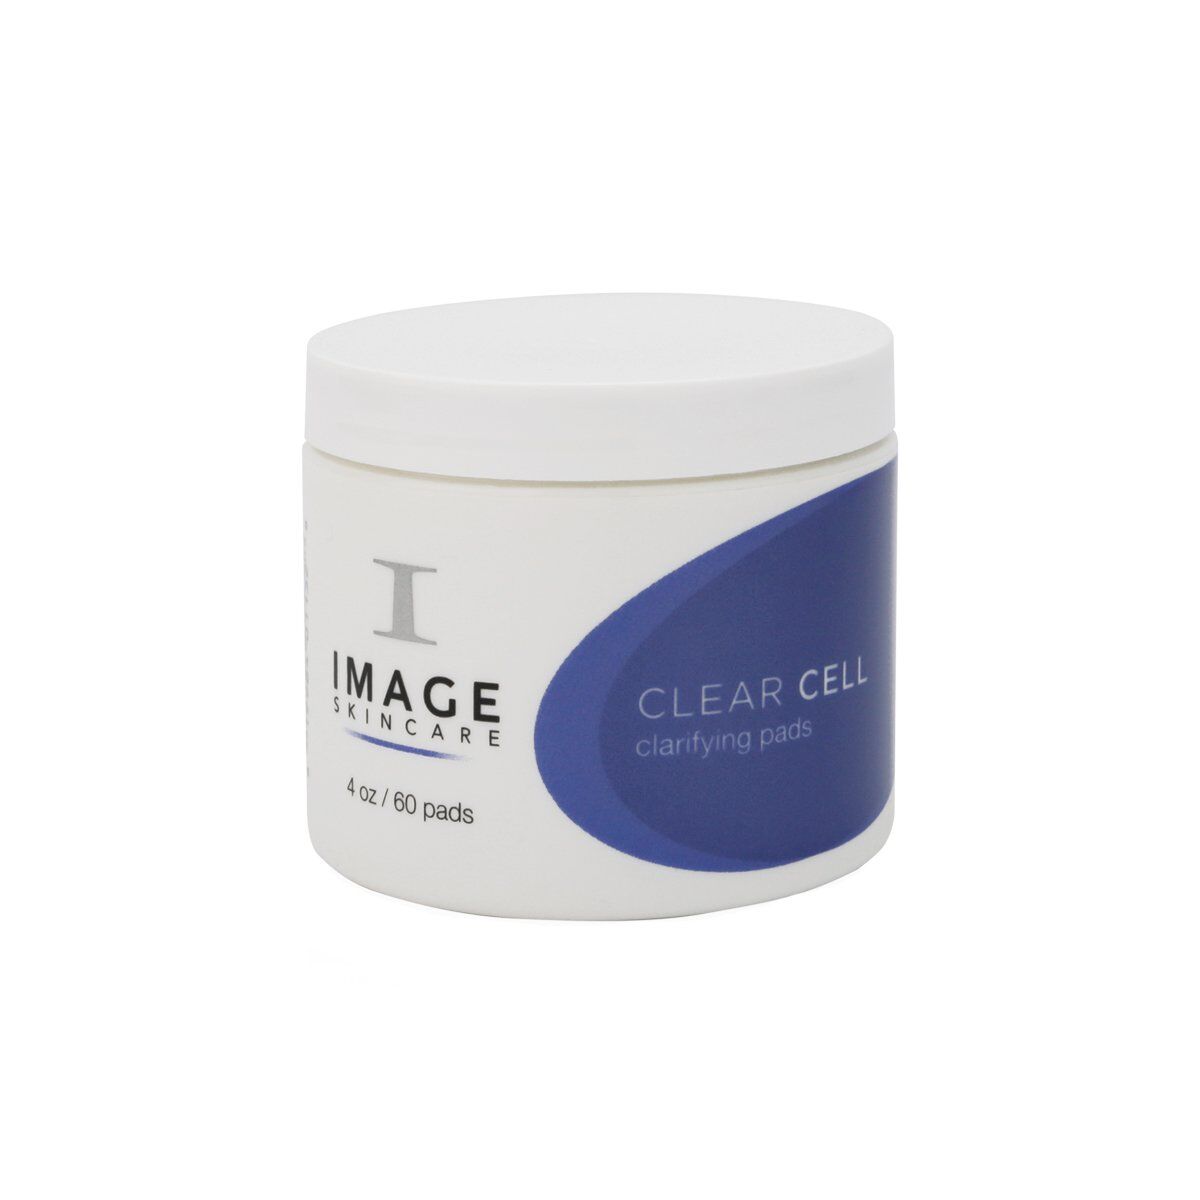 Image skincare - Clear Cell Clarifying pads